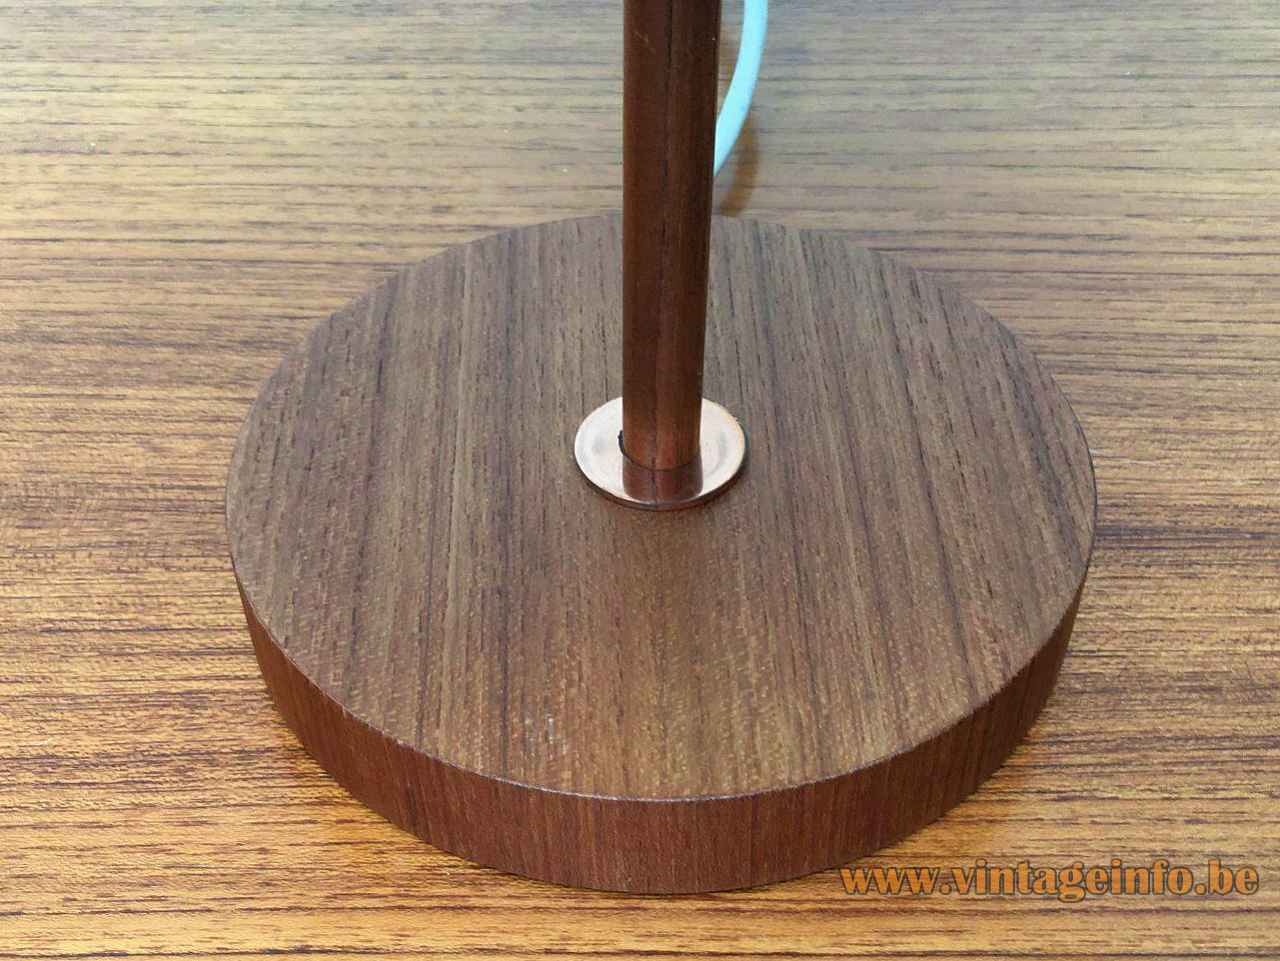 Temde teak table lamp round wood base & rod copper ring 1960s Germany